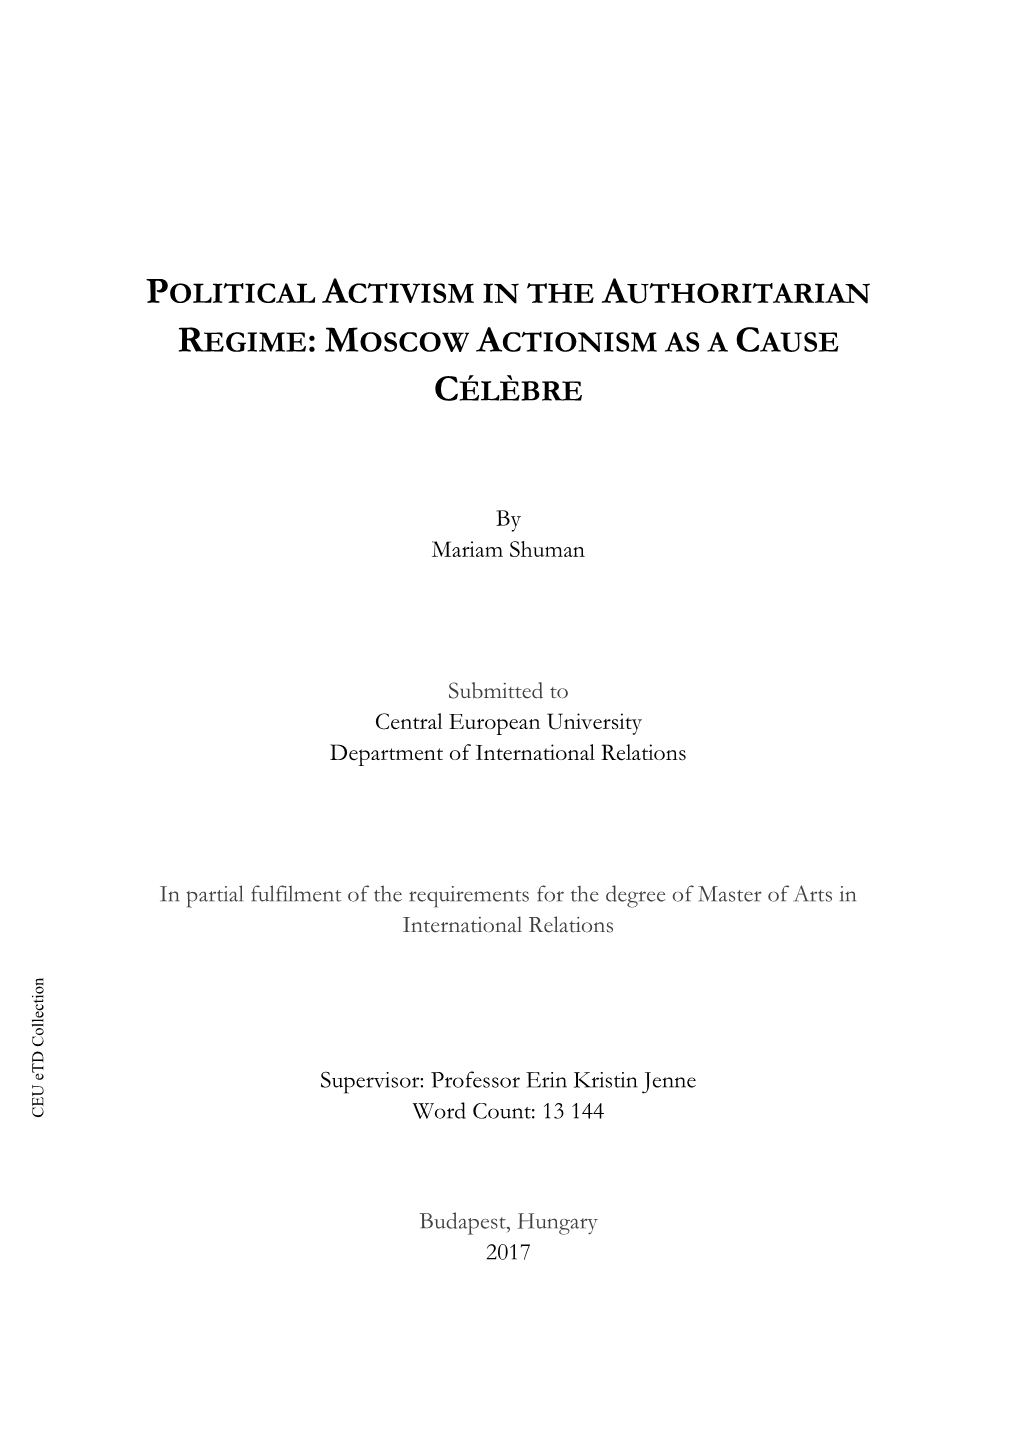 Political Activism in the Authoritarian Regime: Moscow Actionism As a Cause Célèbre